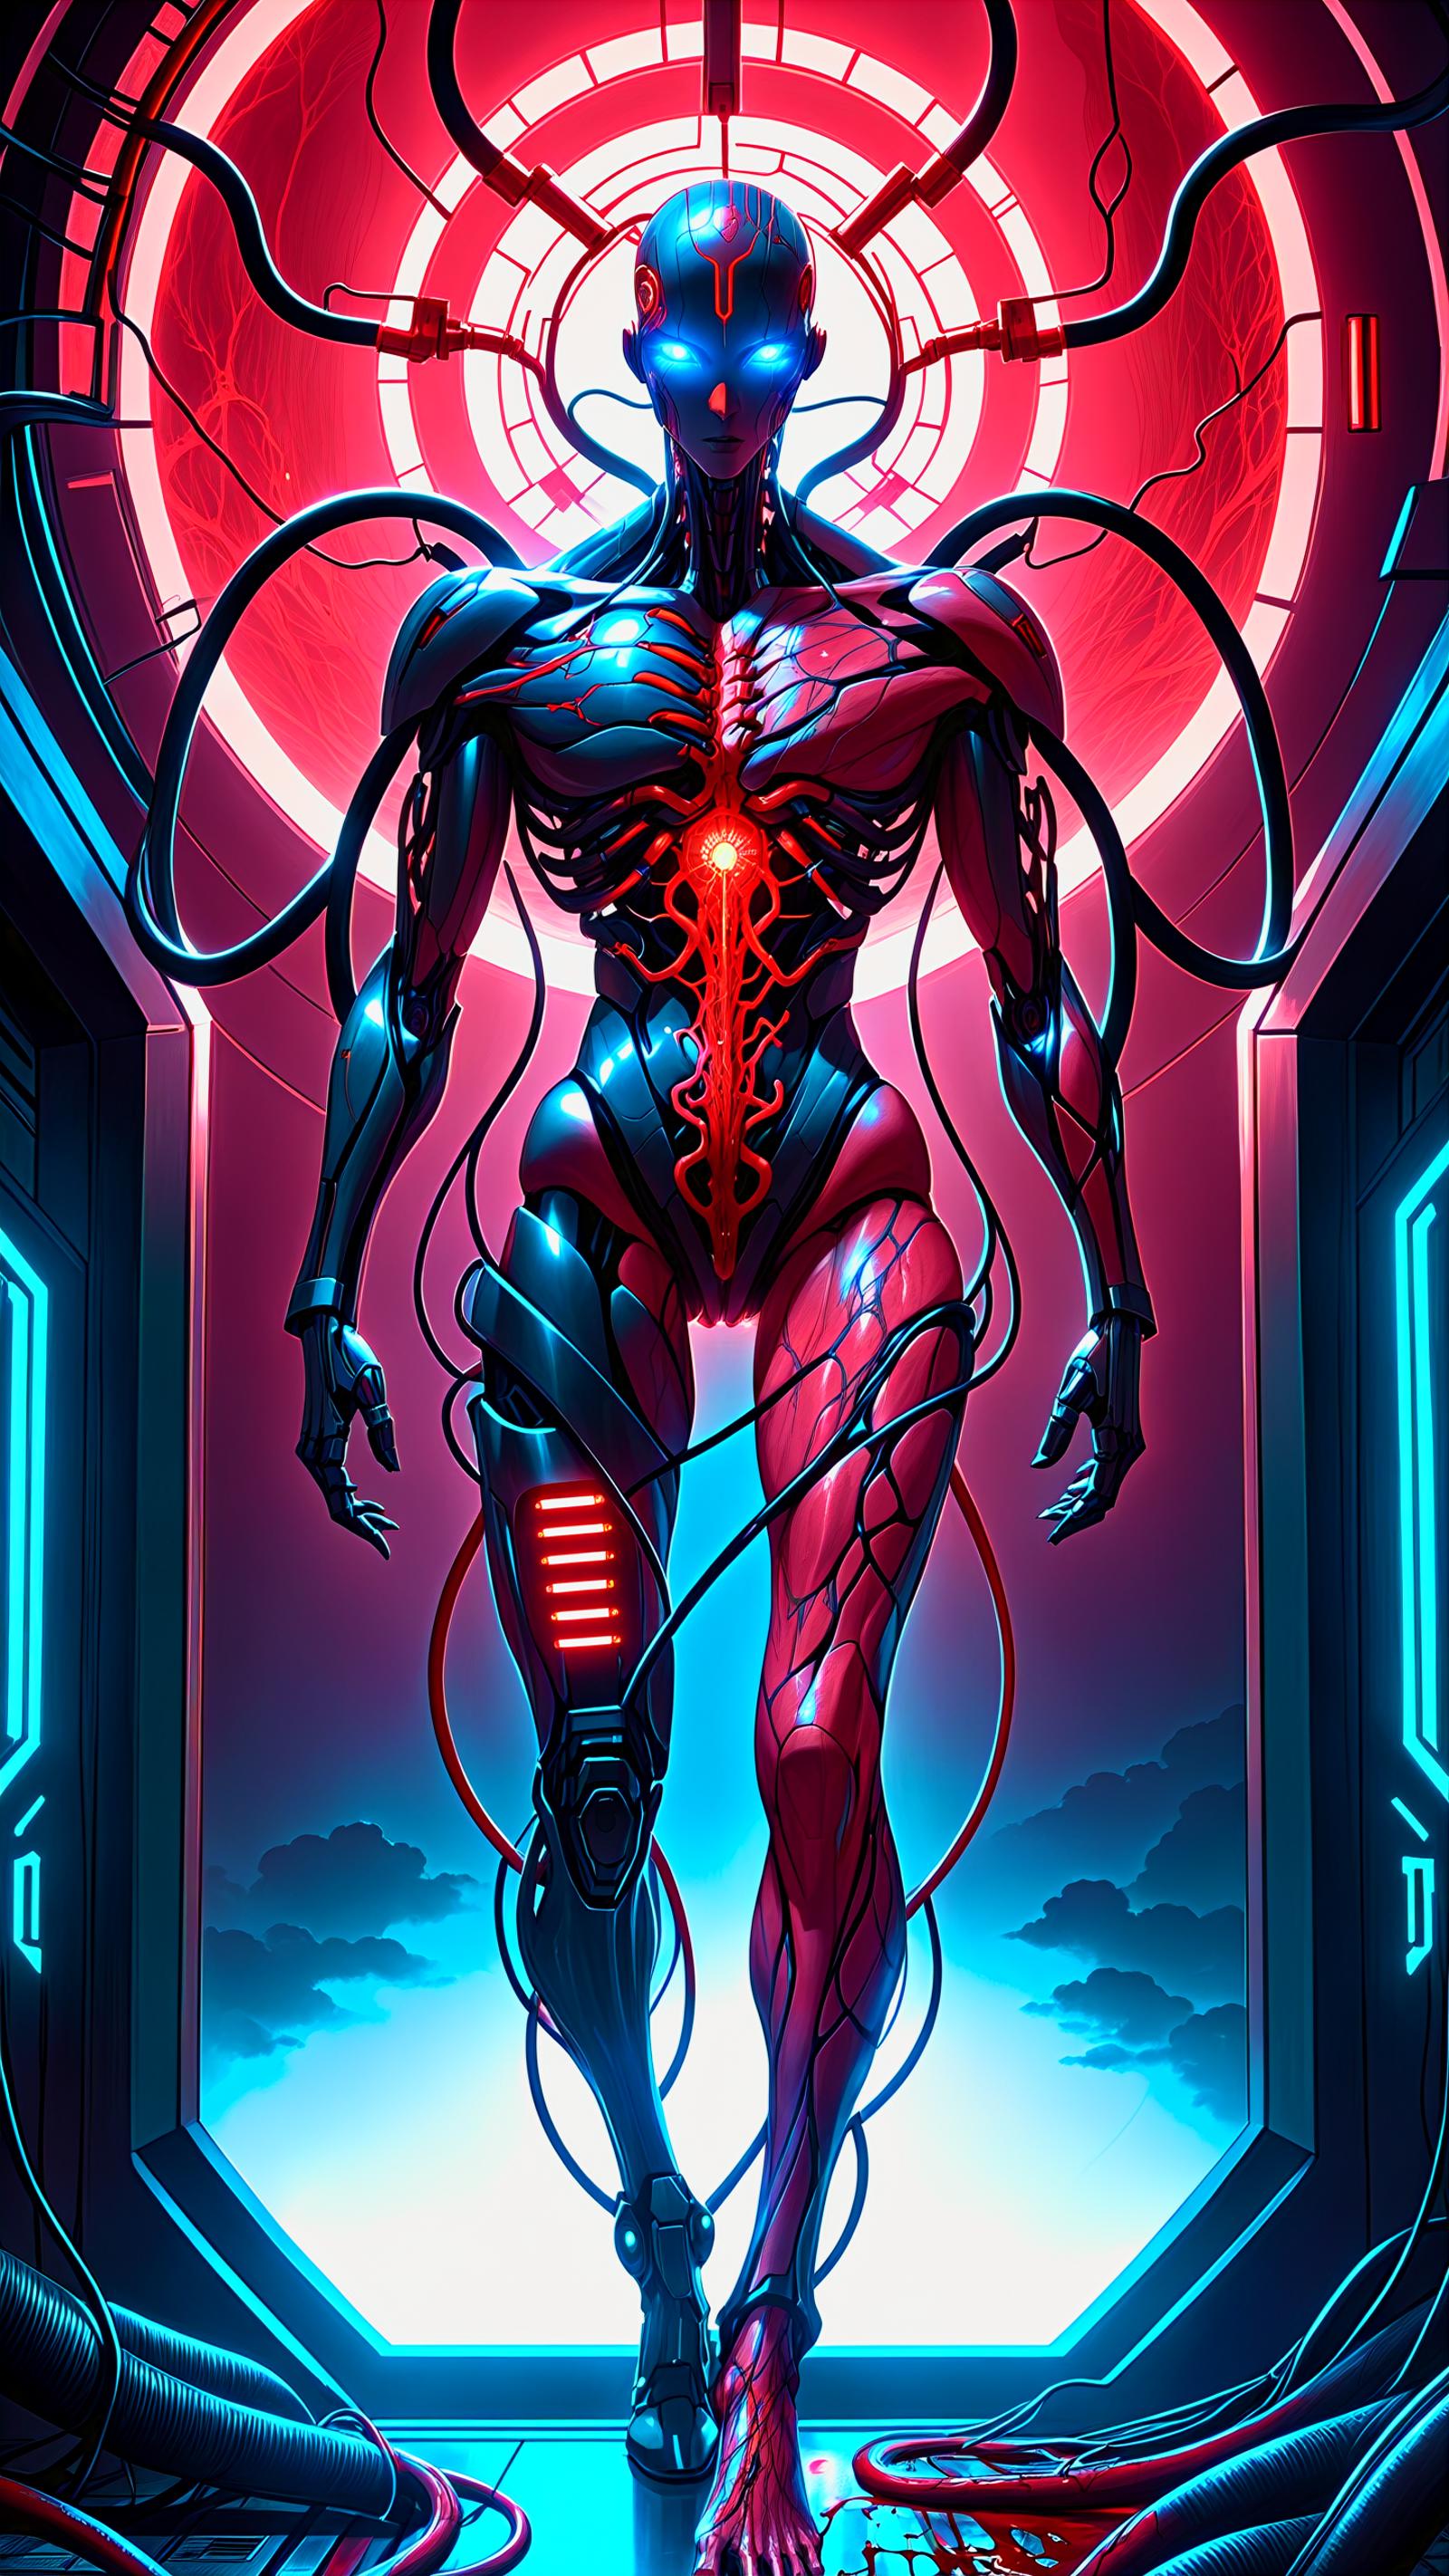 A robot with a red and black body standing in a doorway.